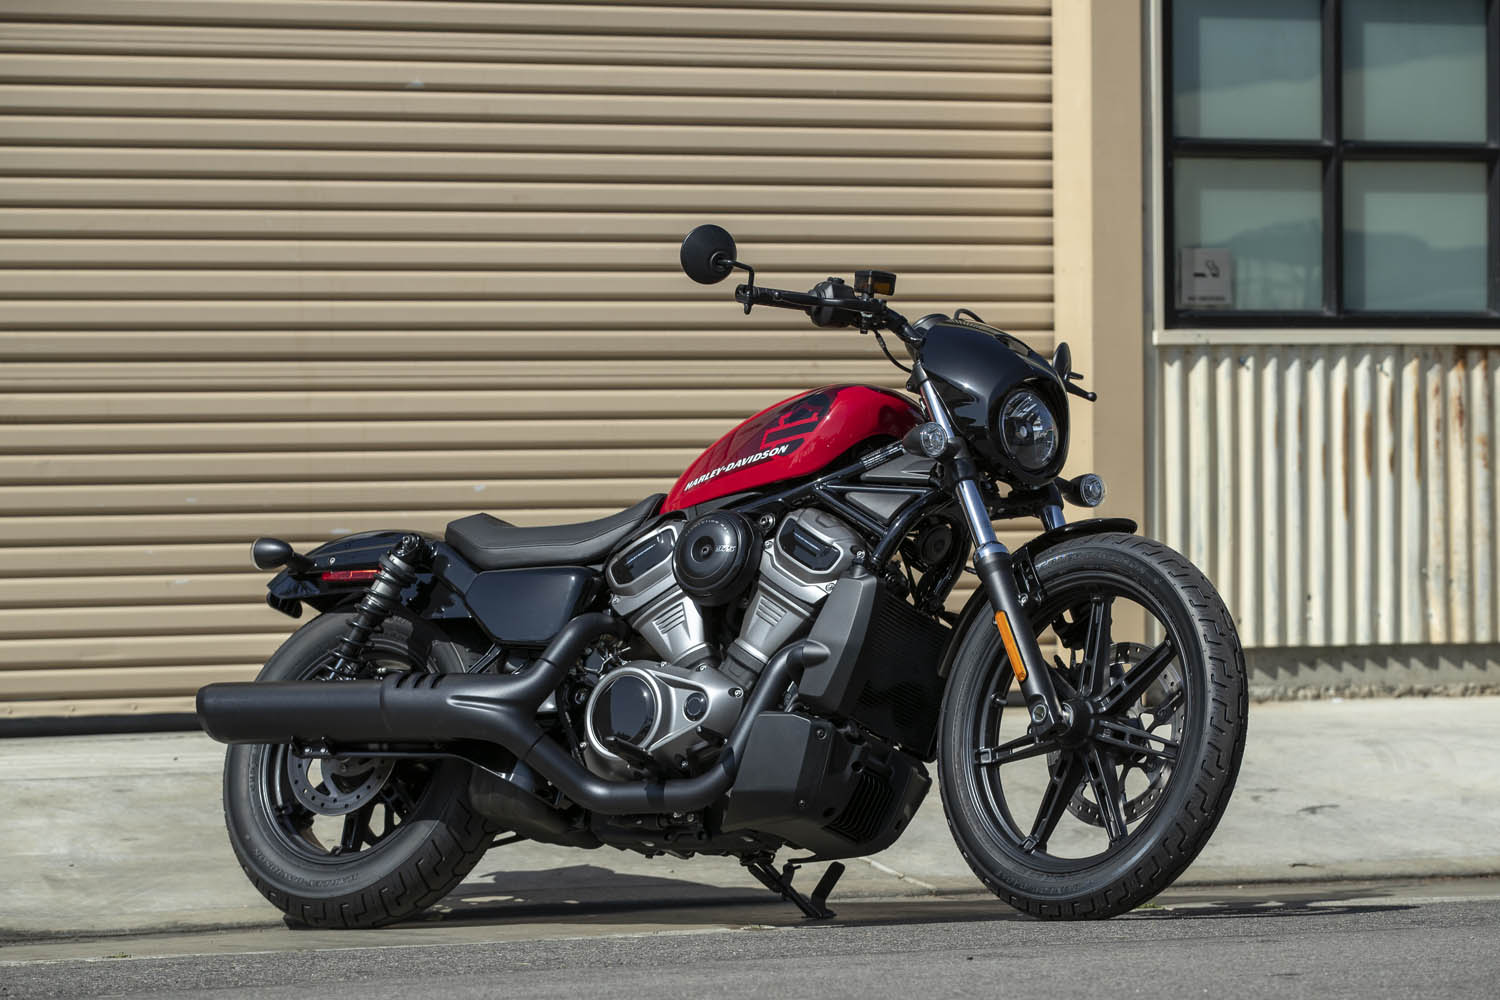 2022 Harley-Davidson Nightster, First Ride Review